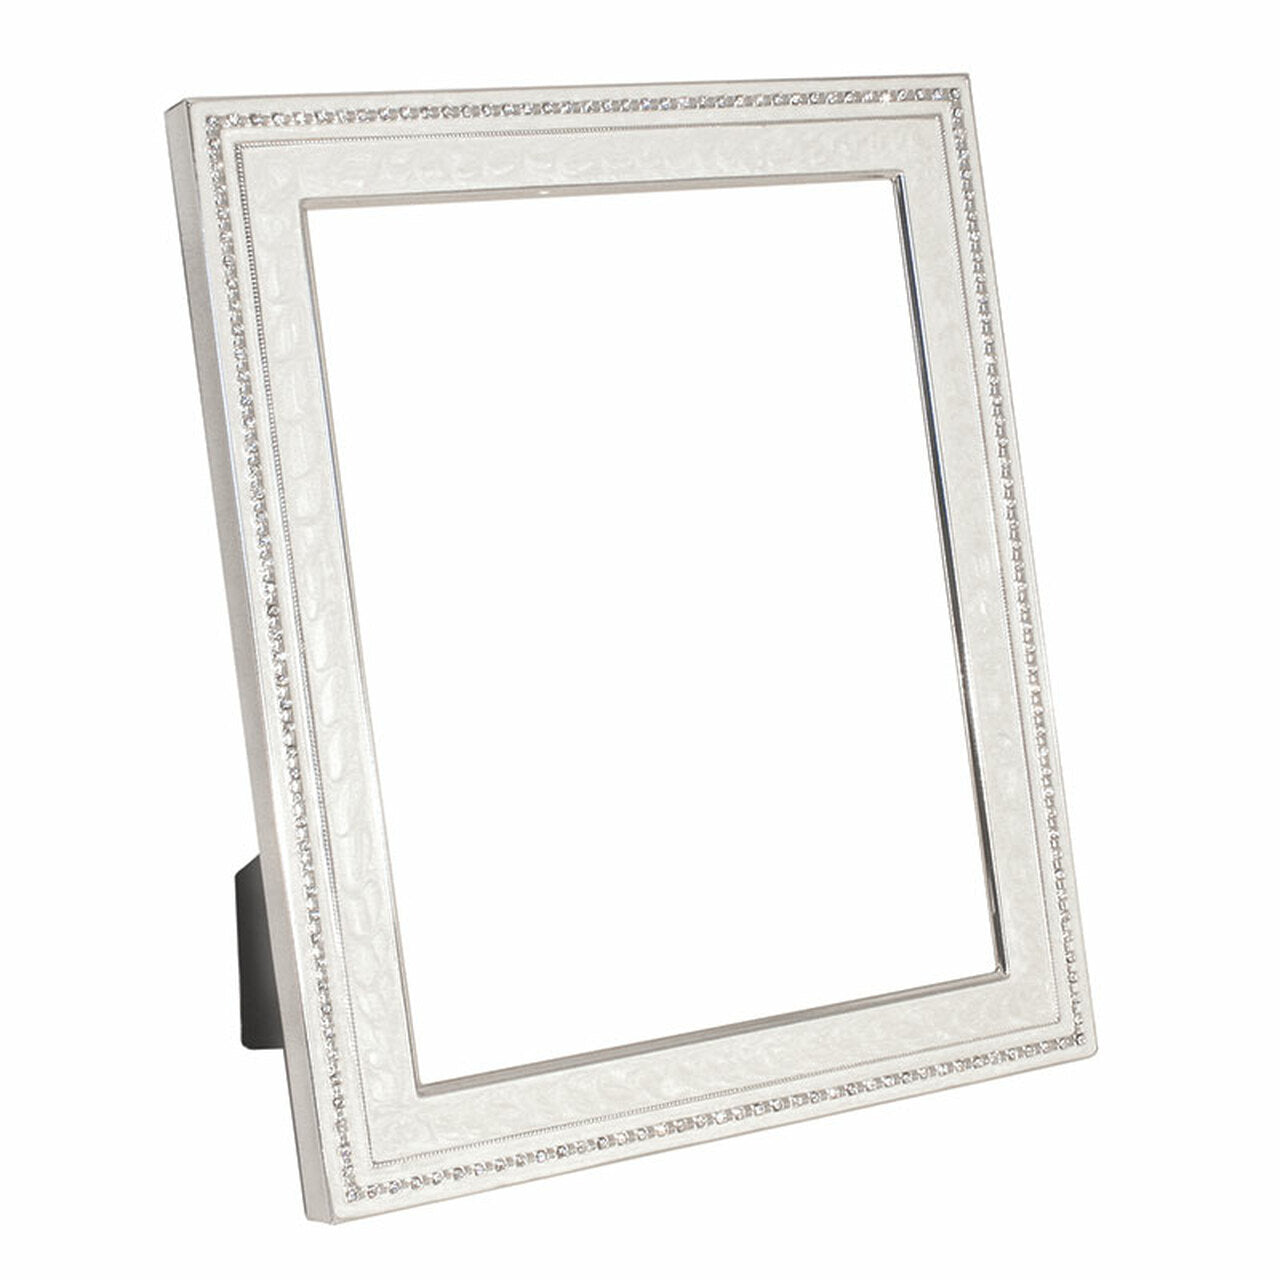 Tipperary Crystal Celebrations Frame 5 Inch x 7 Inch  Share beautiful memories in your living space with luxury Tipperary's picture frames, crafted with care and designed to complement your most precious memories.